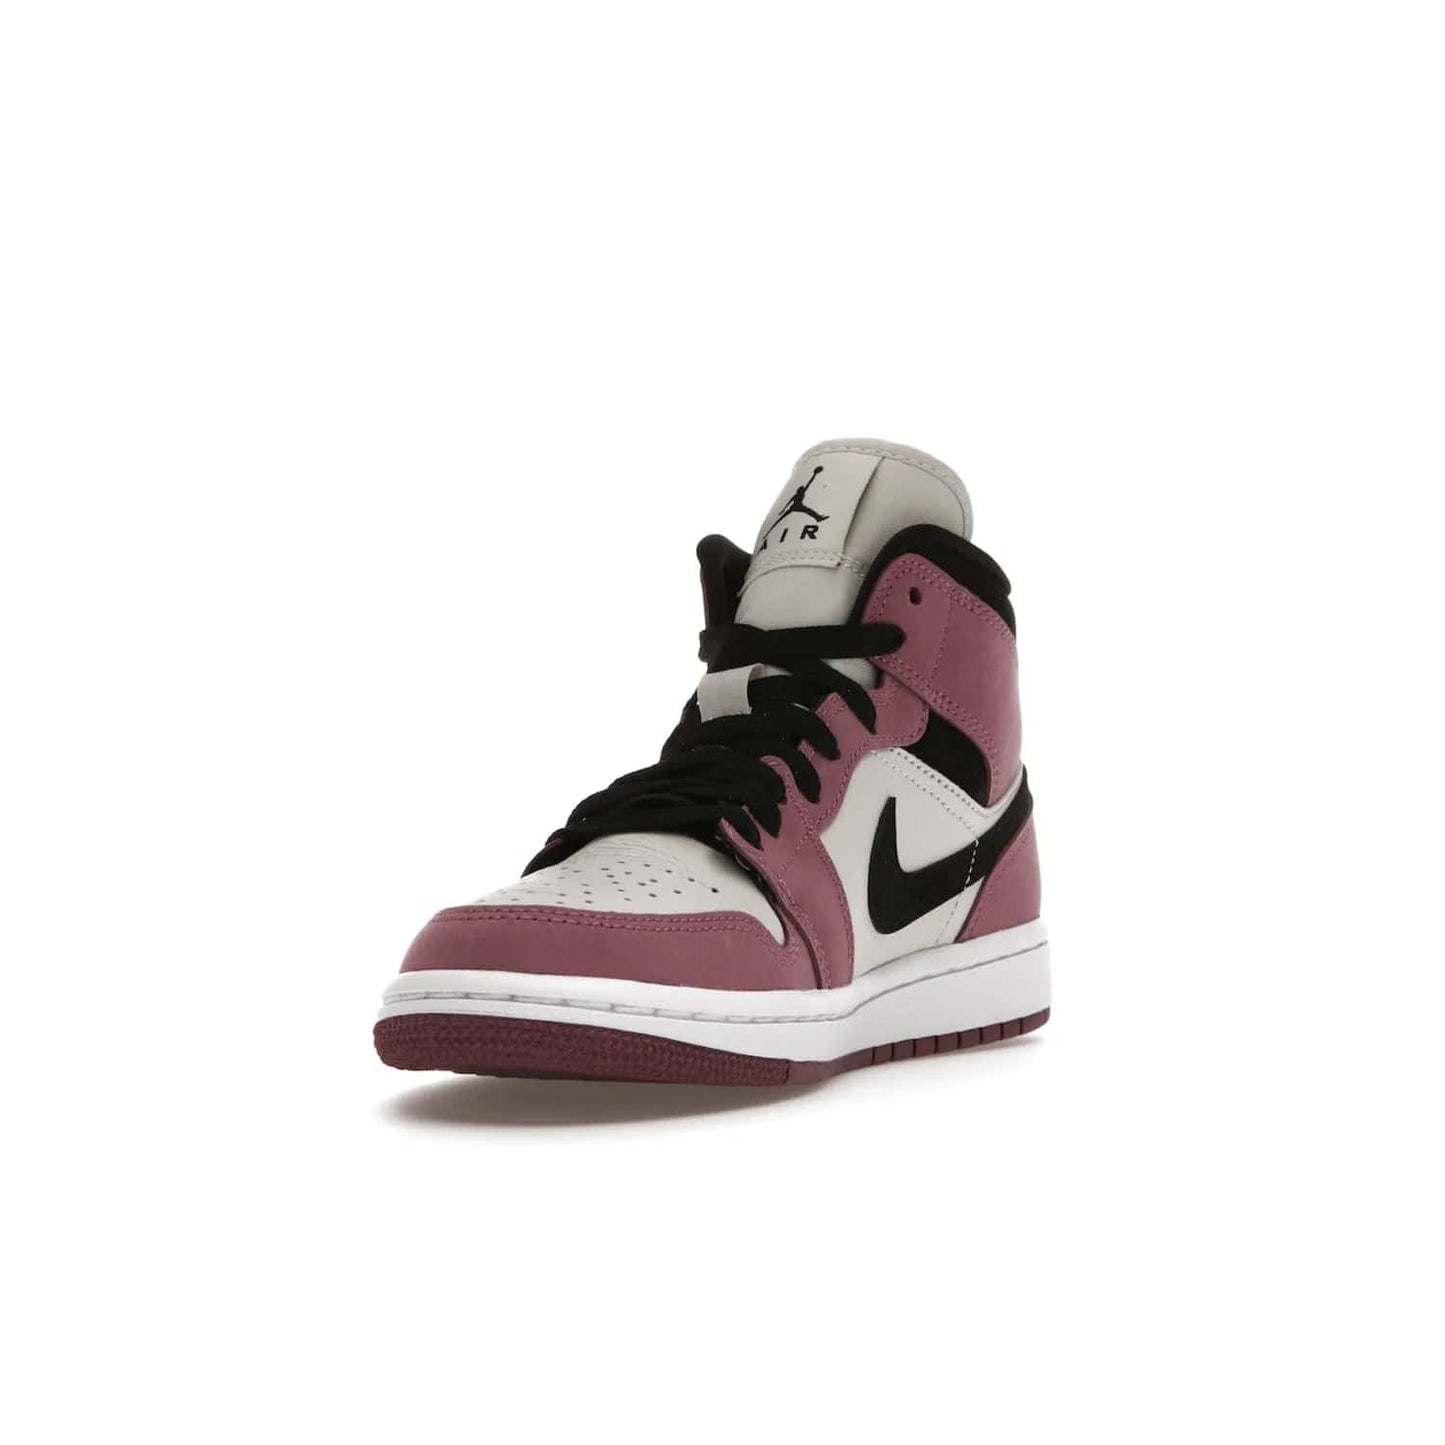 Jordan 1 Mid SE Light Mulberry (Women's) - Image 13 - Only at www.BallersClubKickz.com - Classic style meets performance with the Air Jordan 1 Mid Light Mulberry (Women's). Sleek leather overlays and light bone detailing bring out the best of this classic sneaker, perfect for the active woman on-the-go. Available March 2022.